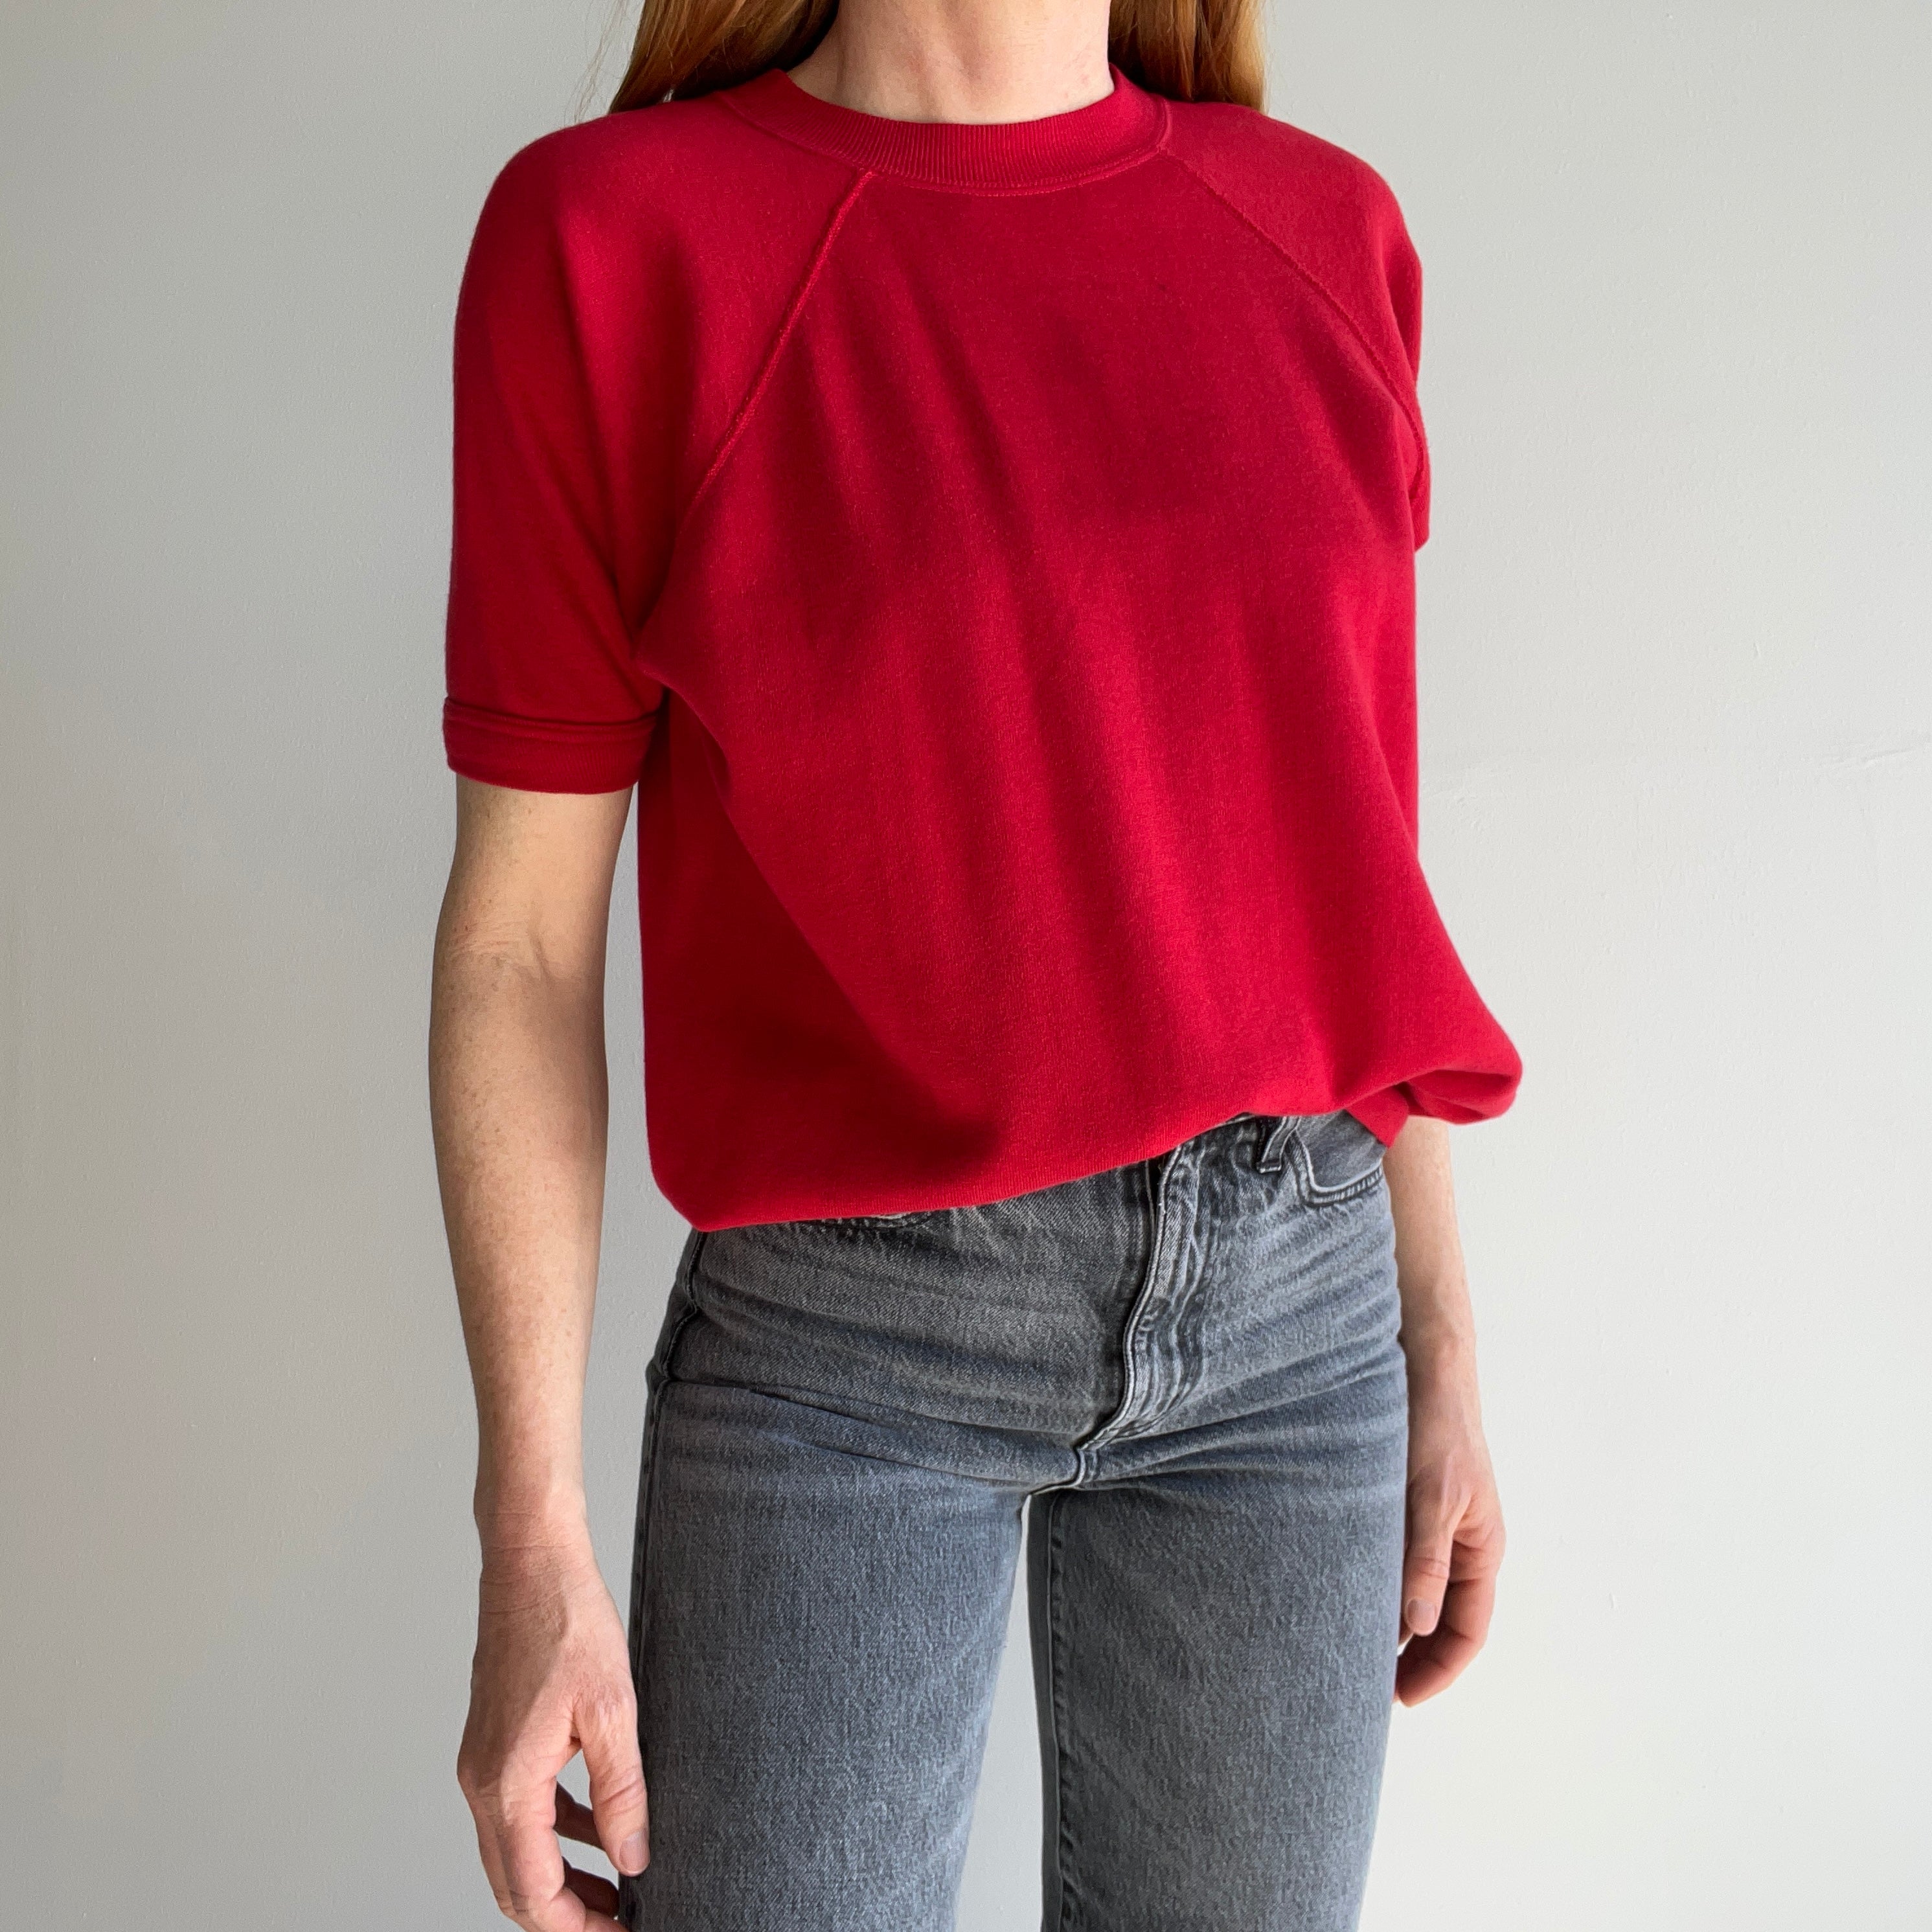 1980s Super Soft and Super Slouchy Lipstick Red Warm UP by Steinwurtzel